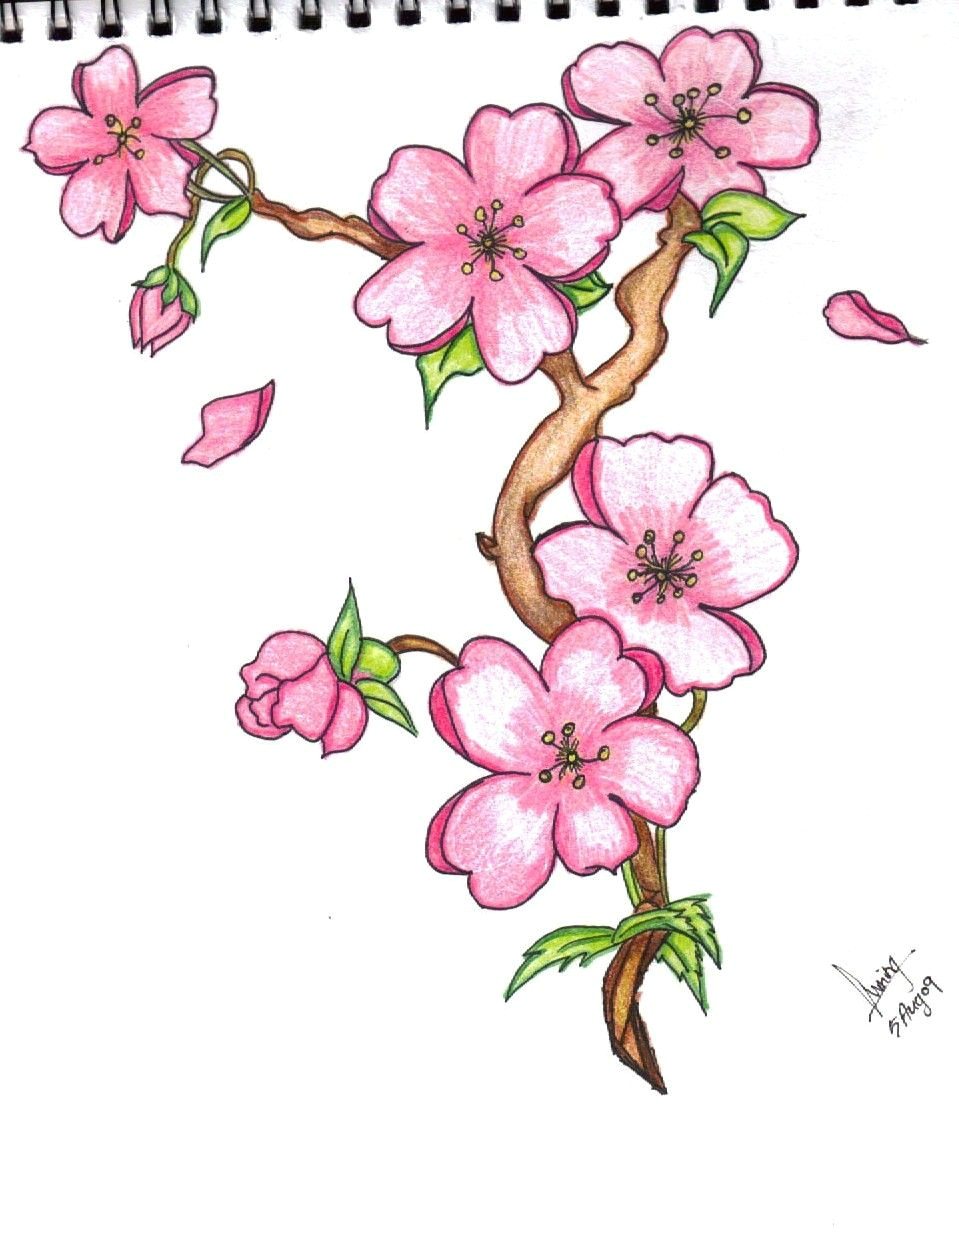 Small Flowers Drawing Easy Pin by Marvin todd On Drawing Flowers In 2019 Pinterest Drawings